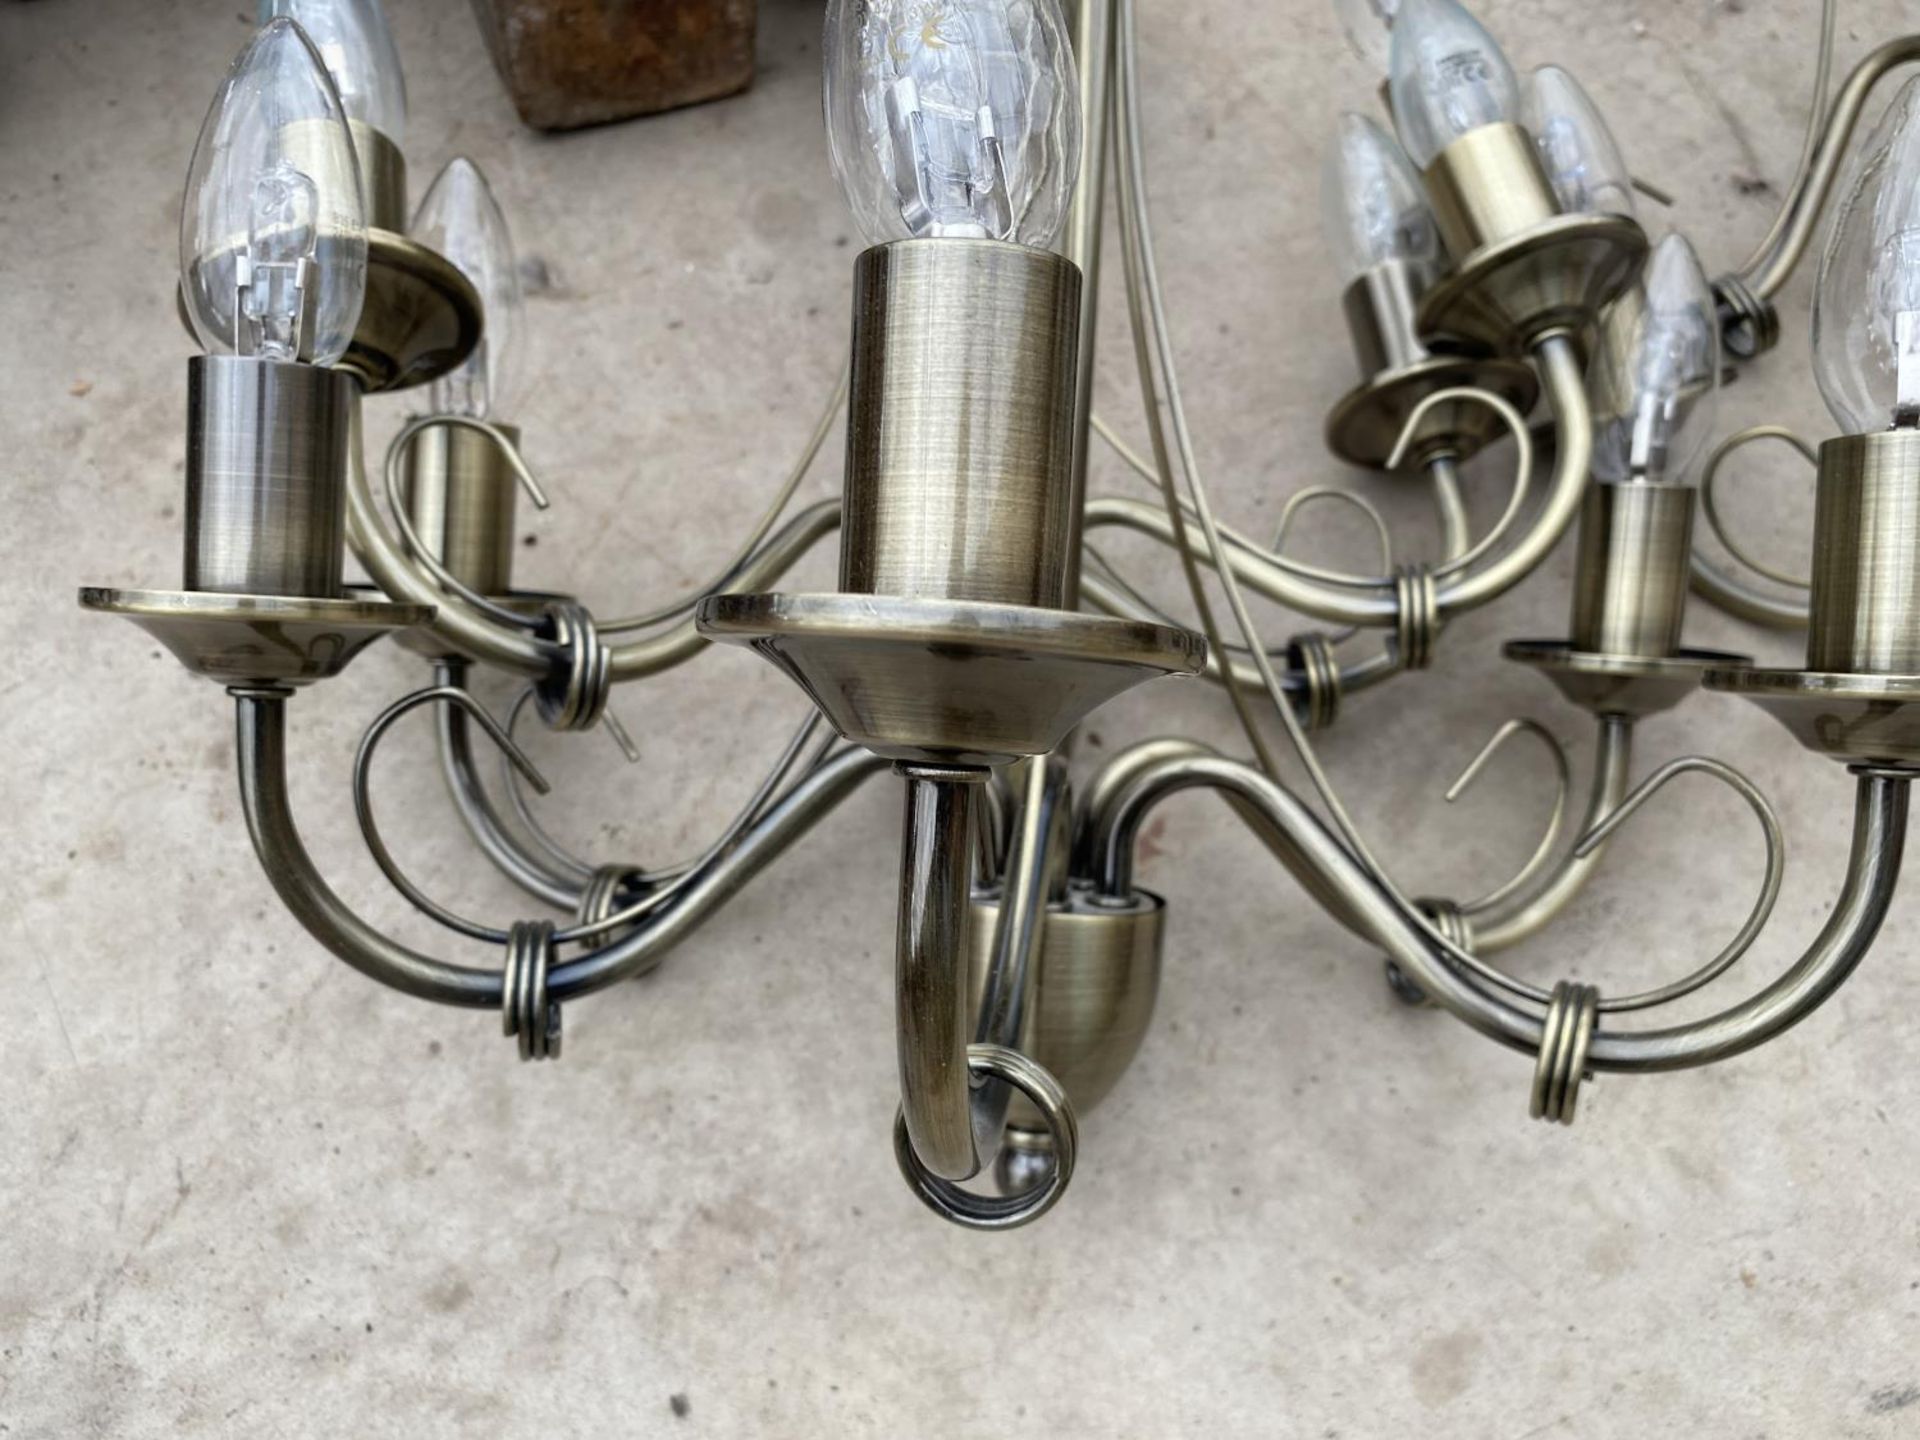 A PAIR OF FIVE BRANCH CEILING LIGHT FITTINGS AND A PAIR OF THREE BRANCH CEILING LIGHT FITTINGS - Image 2 of 4